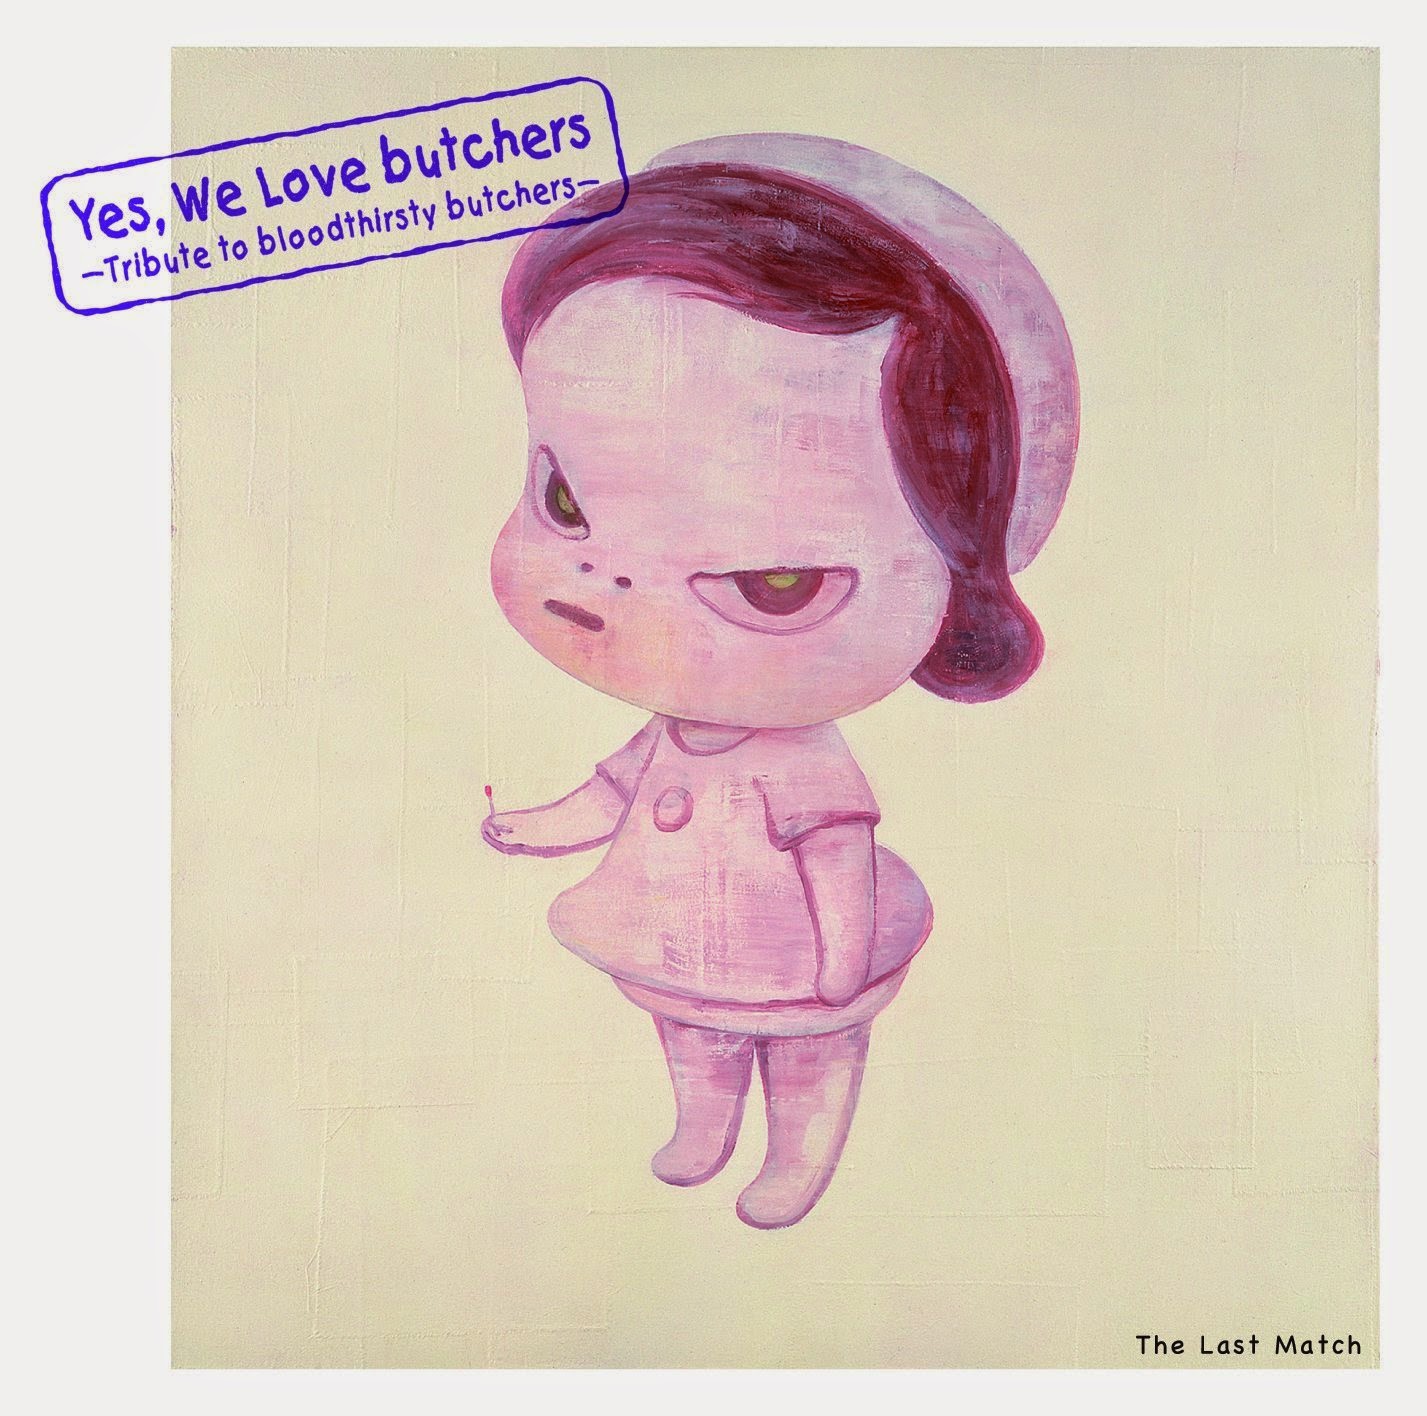 <span class="subTxt">Tribute Album</span>Yes, We Love butchers ～Tribute to bloodthirsty butchers～ The Last Match